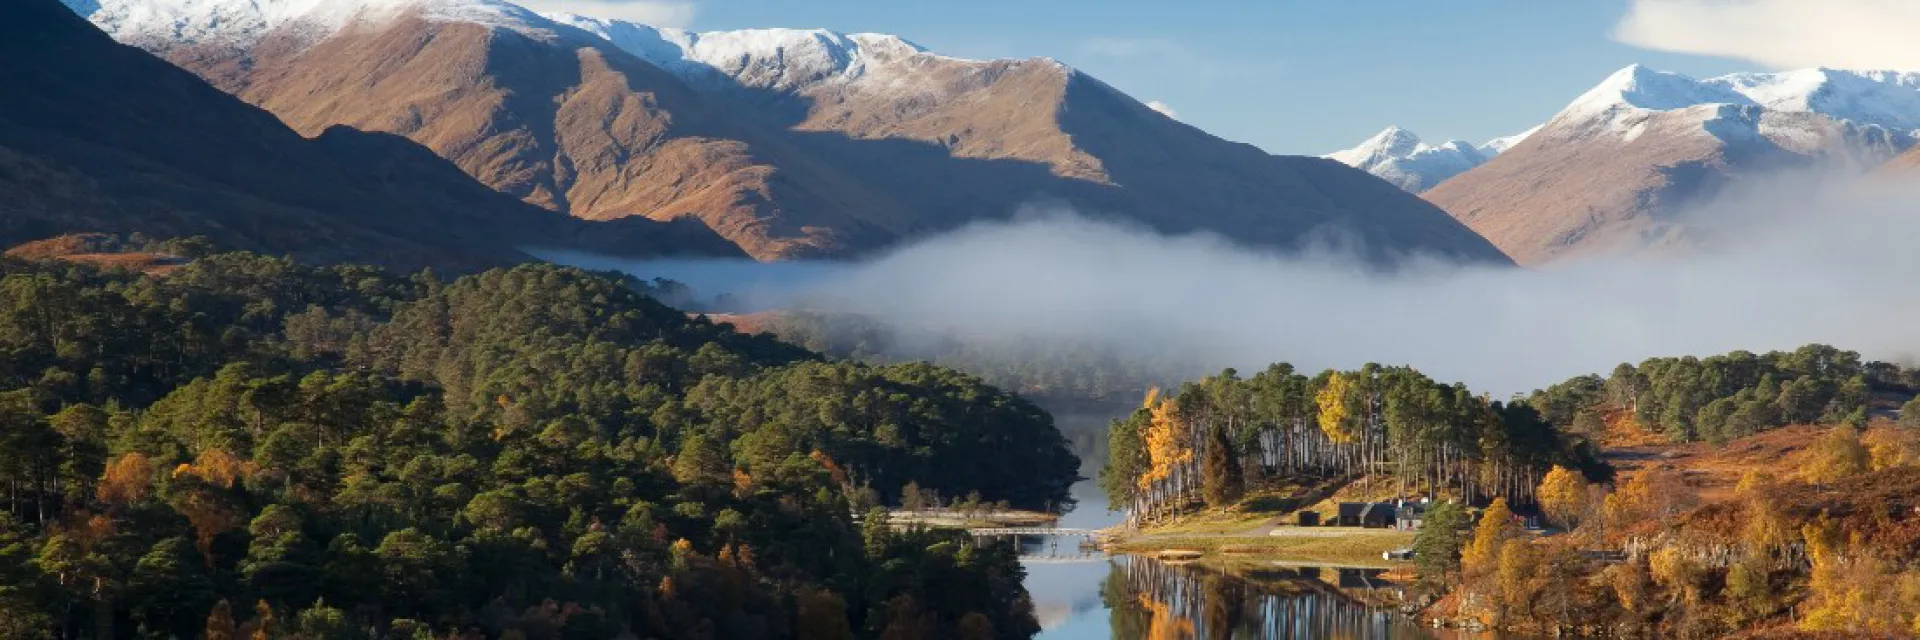 Snow capped mountains in Glen Affric